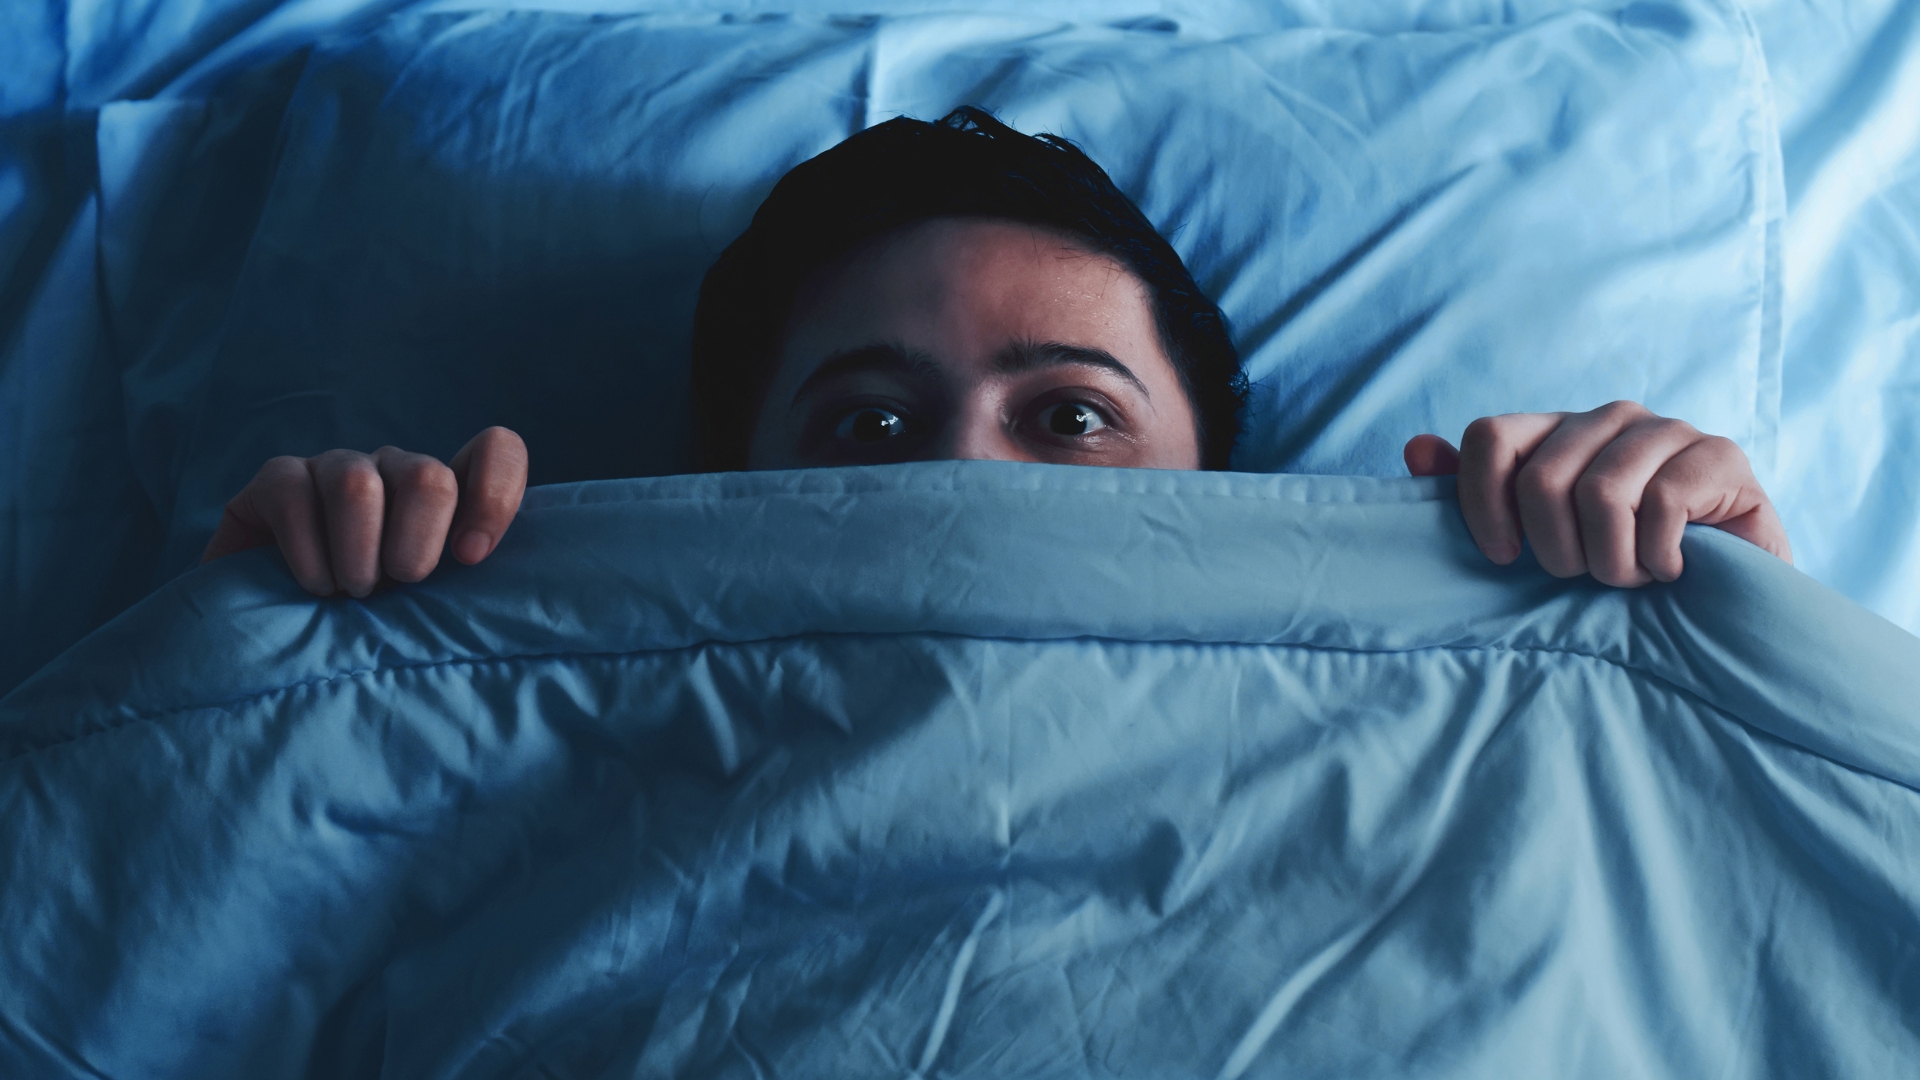 Do you know the cause of sleep paralysis?